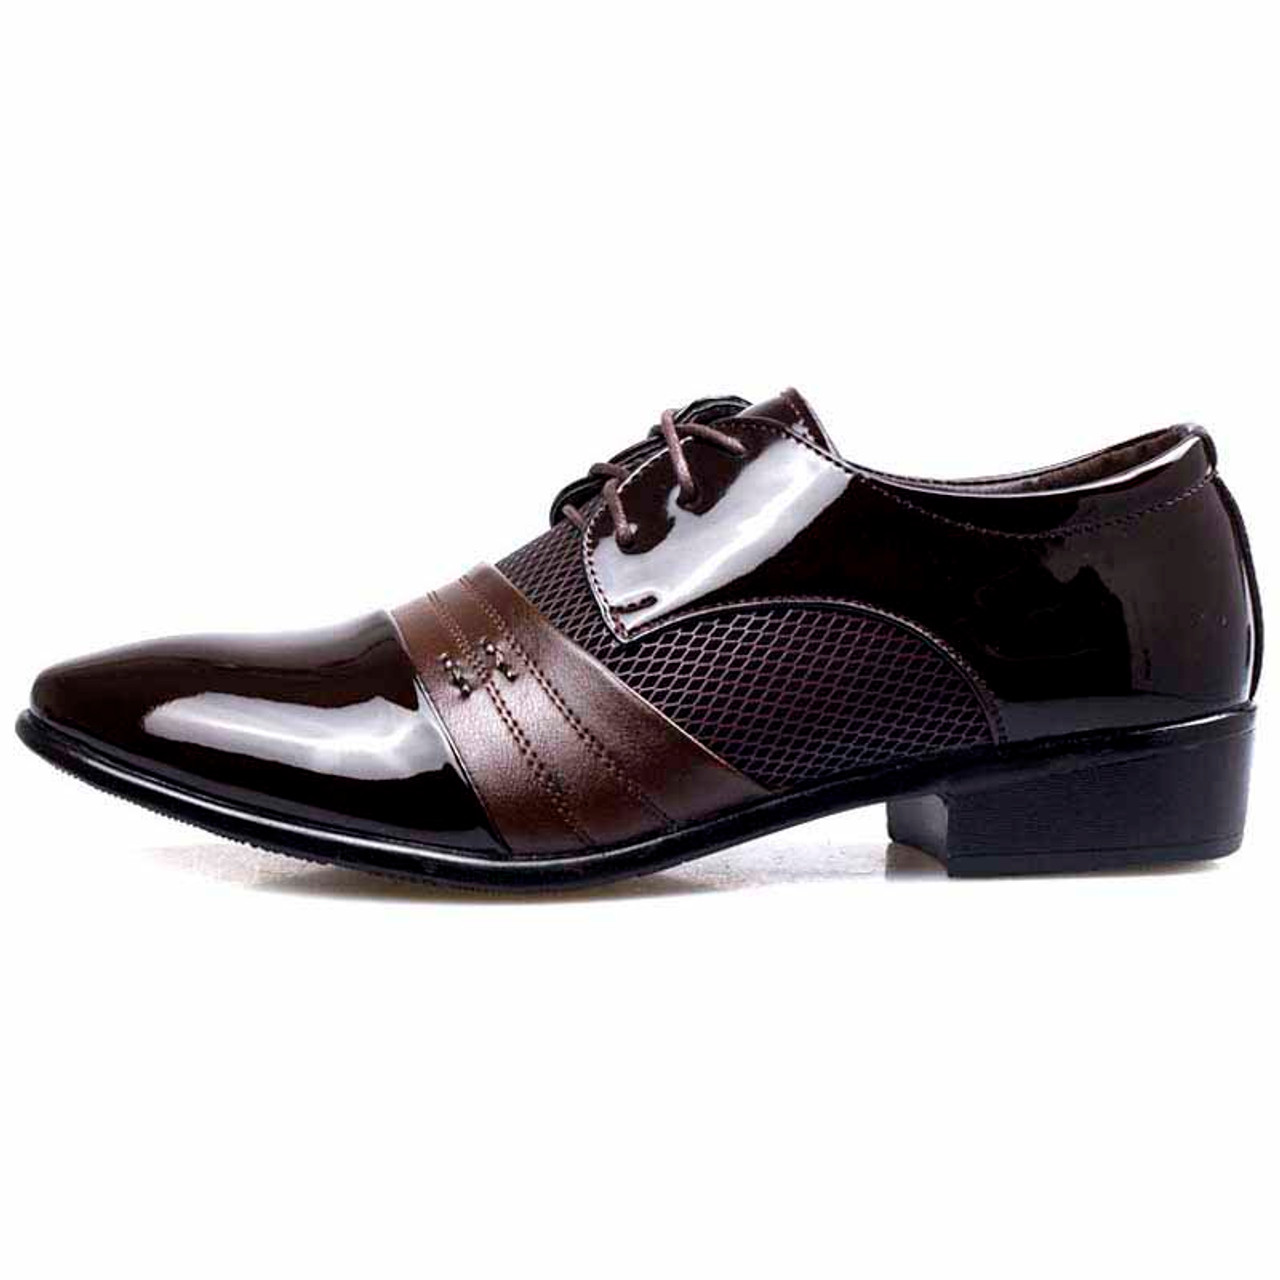 Brown check pattern leather derby dress shoe | Mens dress shoes online ...